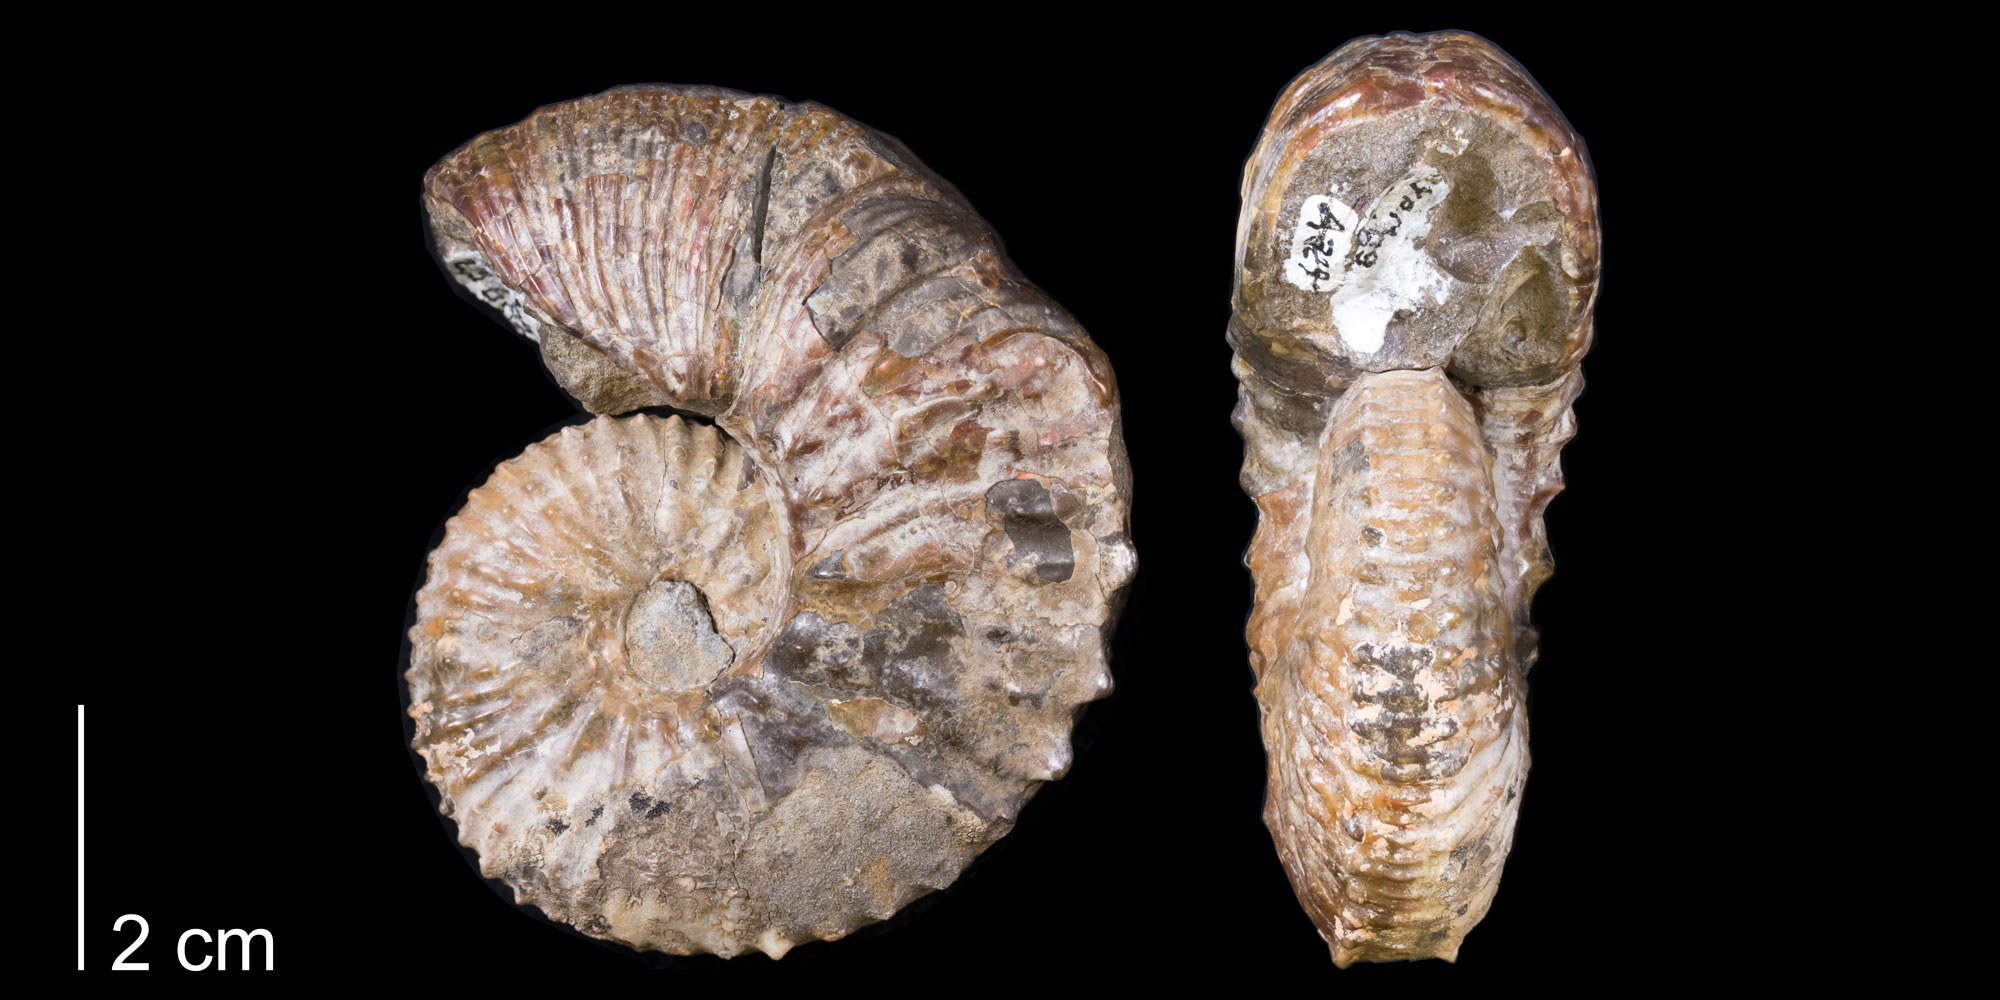 Photographs showing two views of the shell of an ammonoid from the Late Cretaceous of South Dakota. The photos show the same shell in side view and from the narrow side, with the aperture (opening) facing the camera and at the top of the shell. The shell has regularly spaced ridges and is light brown and shiny. 